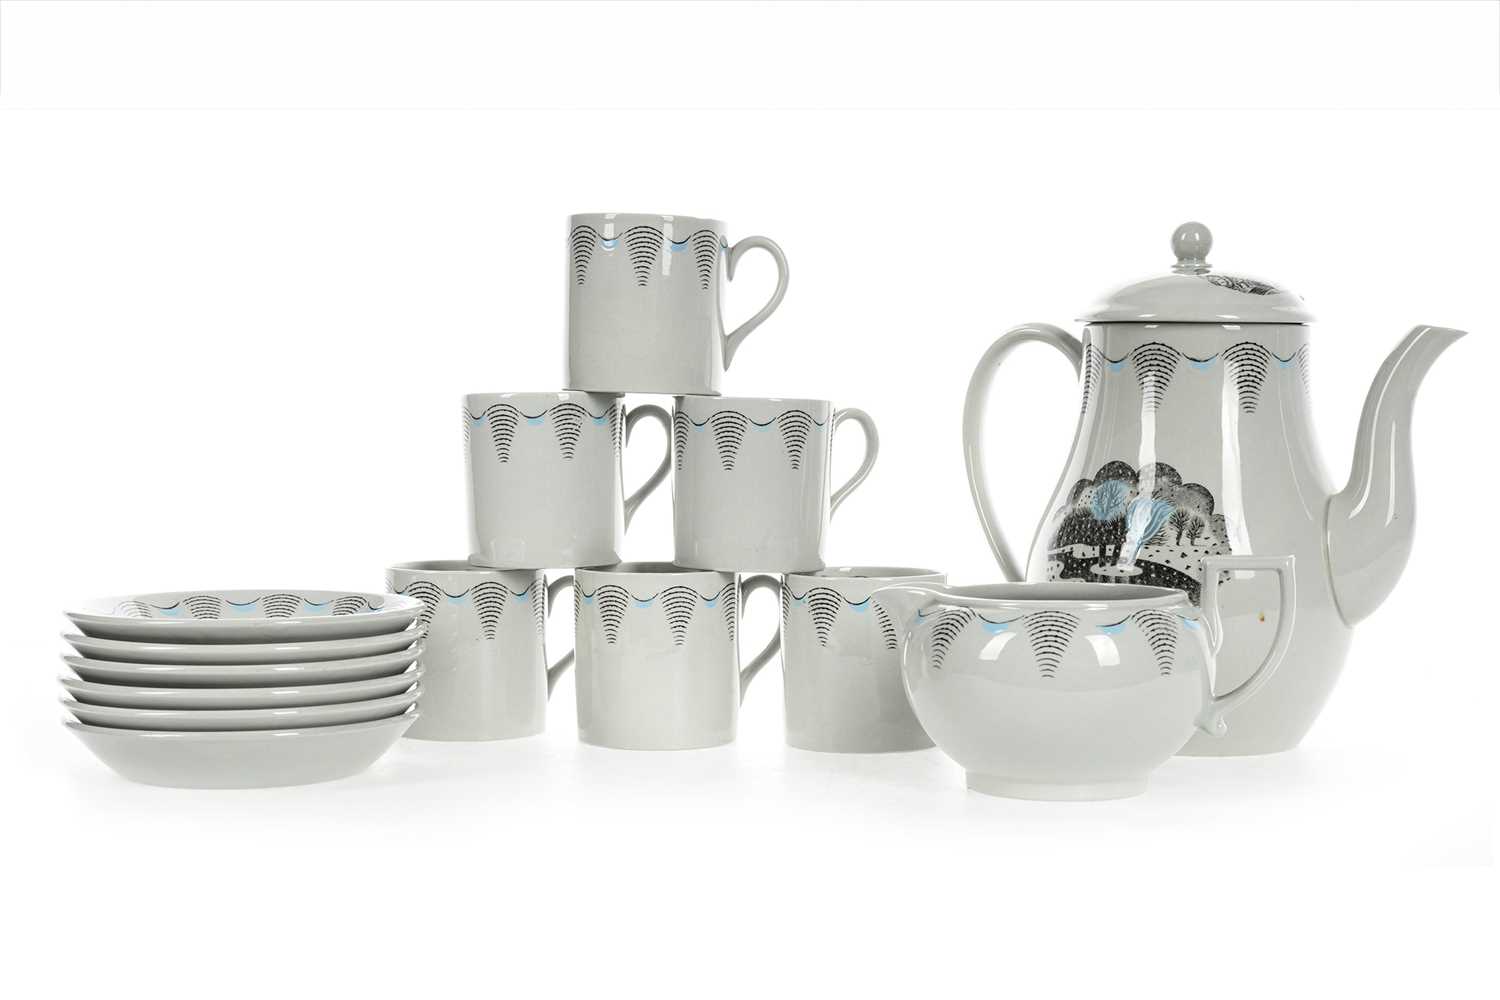 ERIC RAVILIOUS (BRITISH, 1903-1942) FOR WEDGWOOD, 'TRAVEL' PART-COFFEE SERVICE, CIRCA 1940s